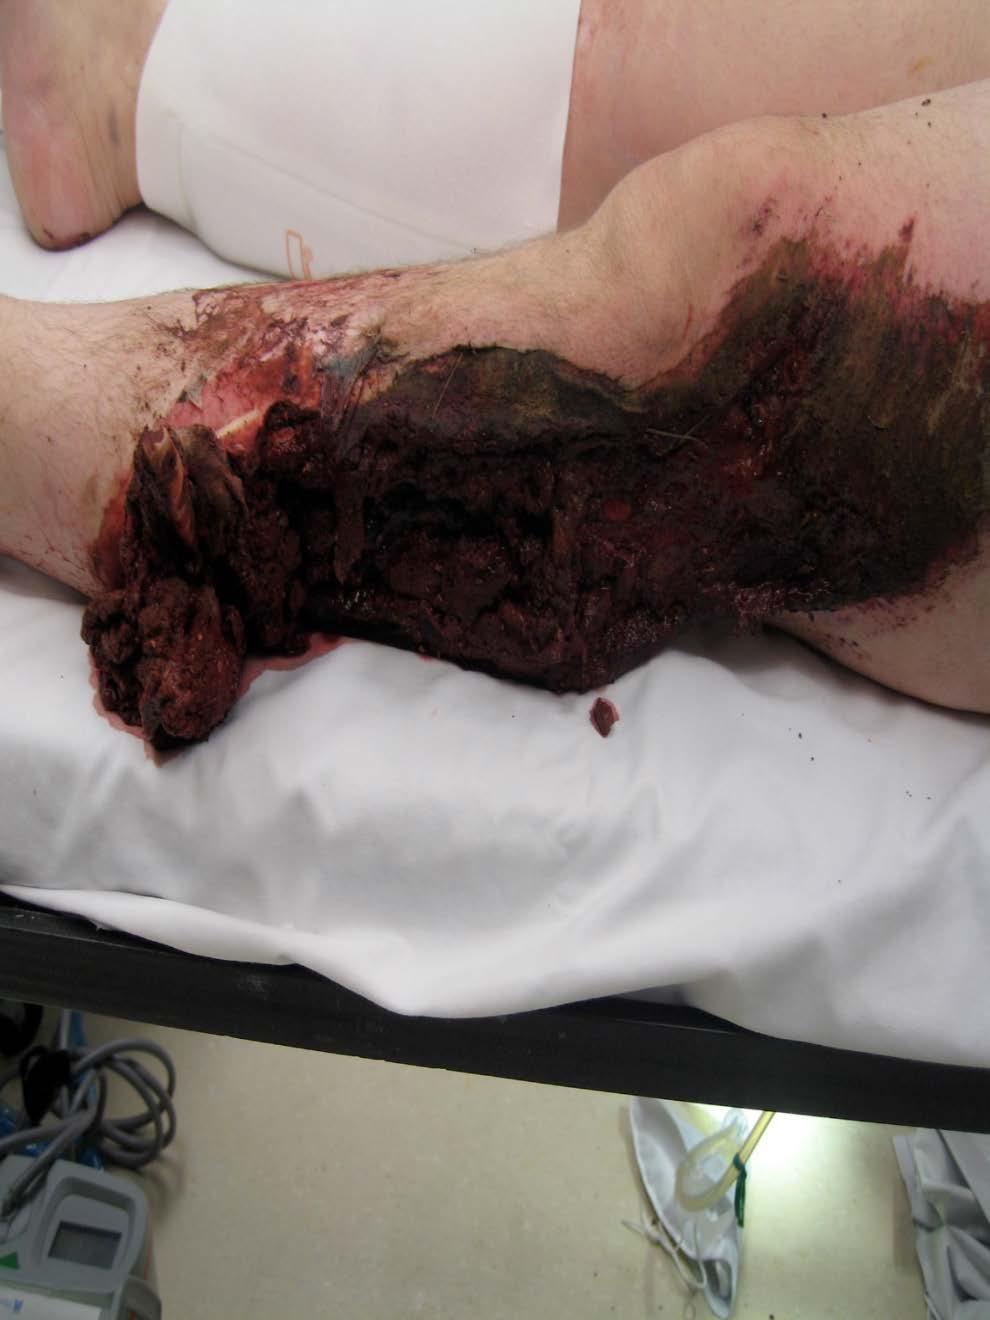 Wound Excision- Debridement Conversion of traumatic wound to a surgical wound with debridement of all devitalized tissue skin, fascia, and bone Unless gross contamination, evidence unclear as to best